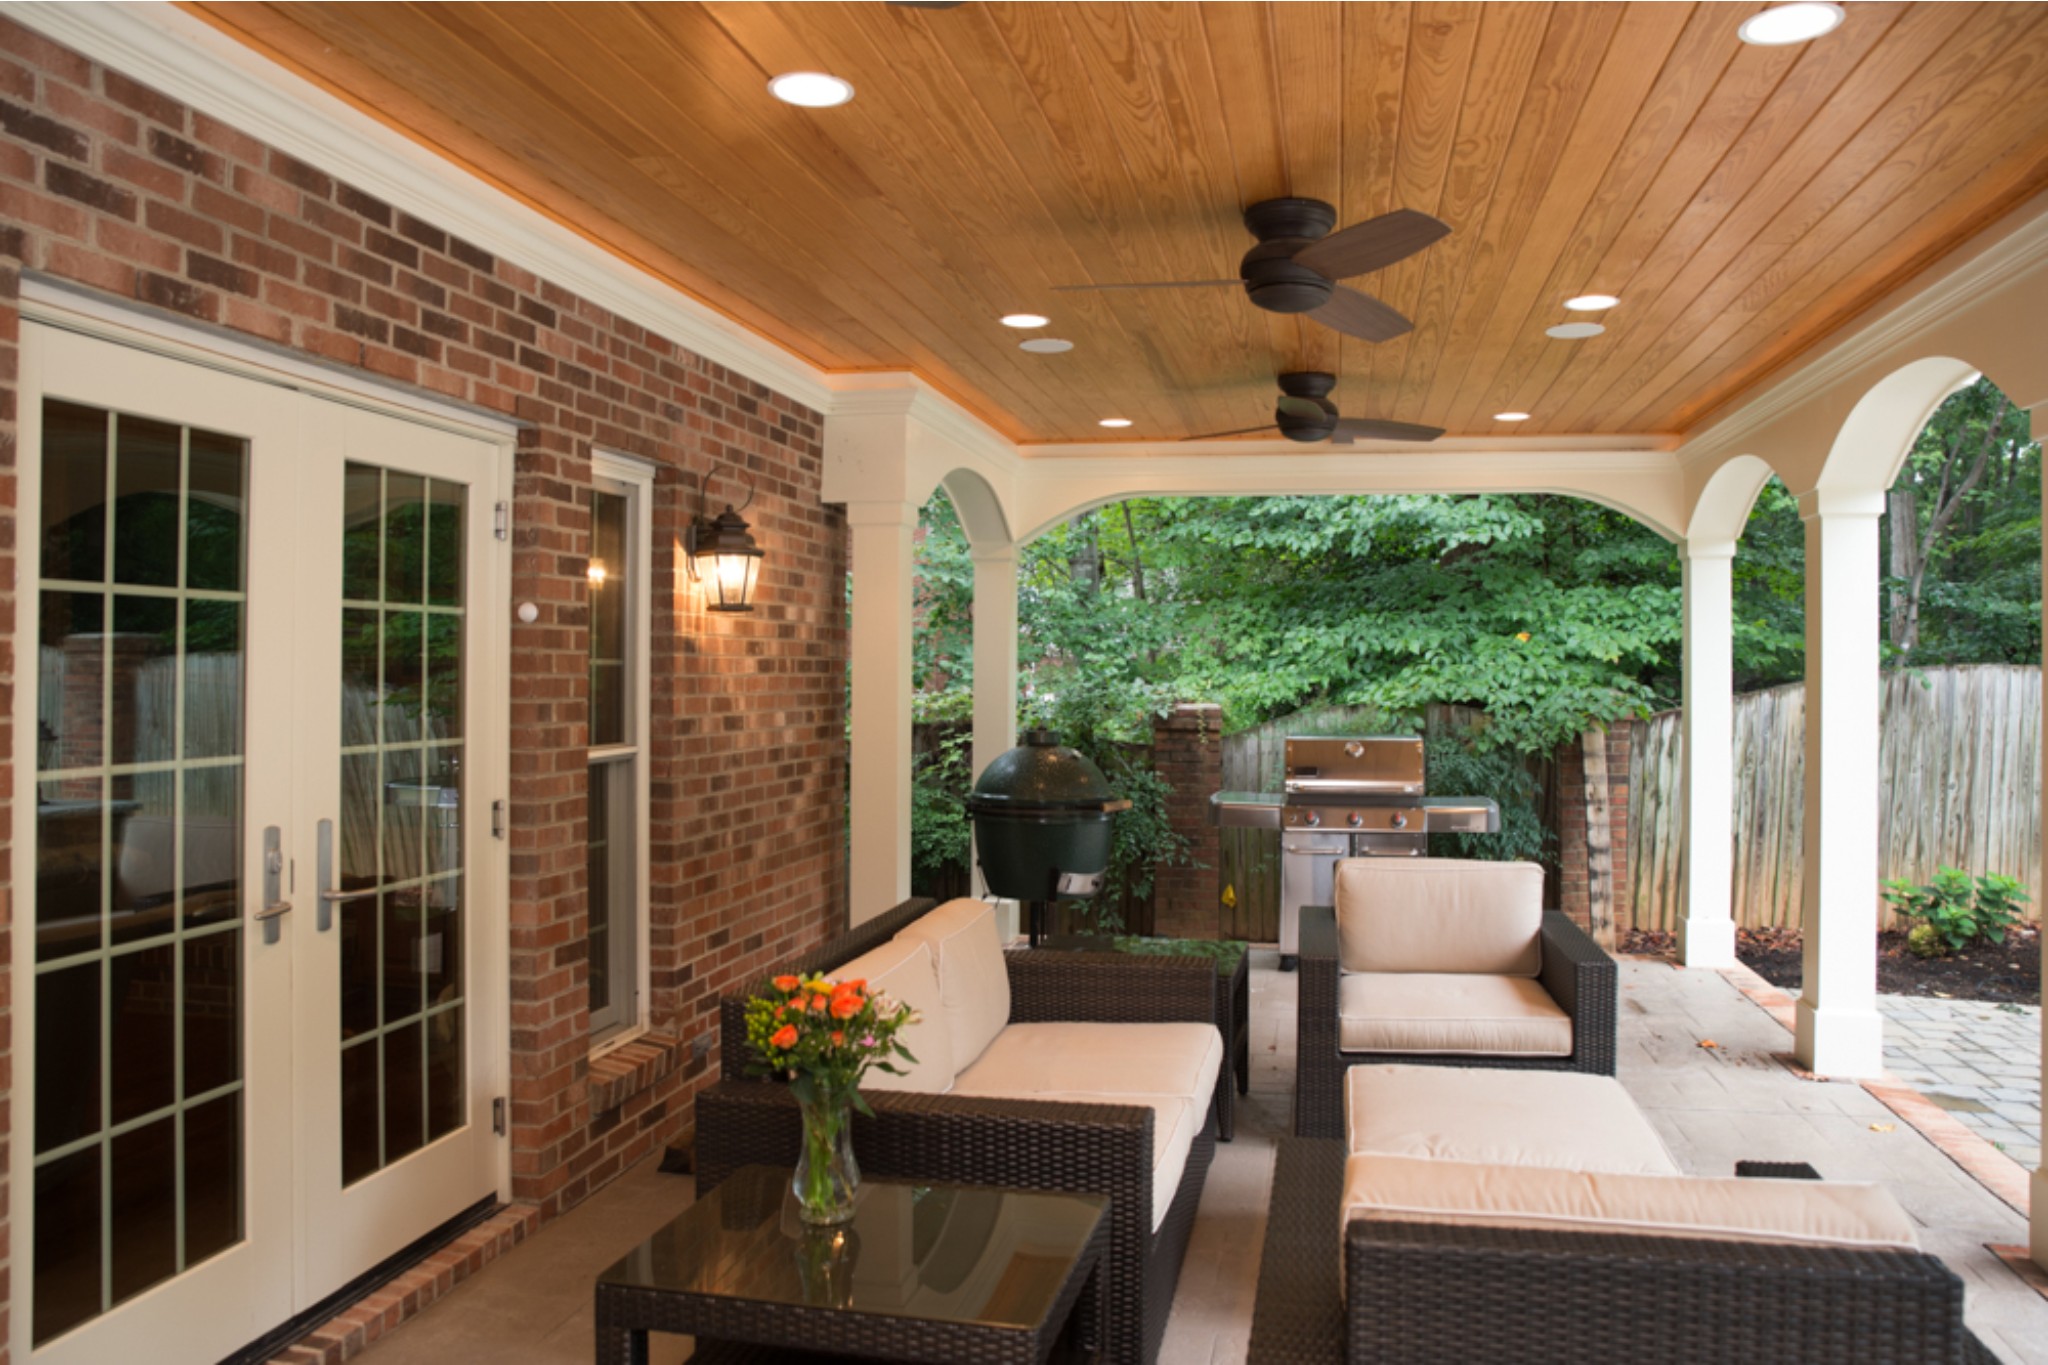 Outdoor patio home addition with recessed lighting and french doors